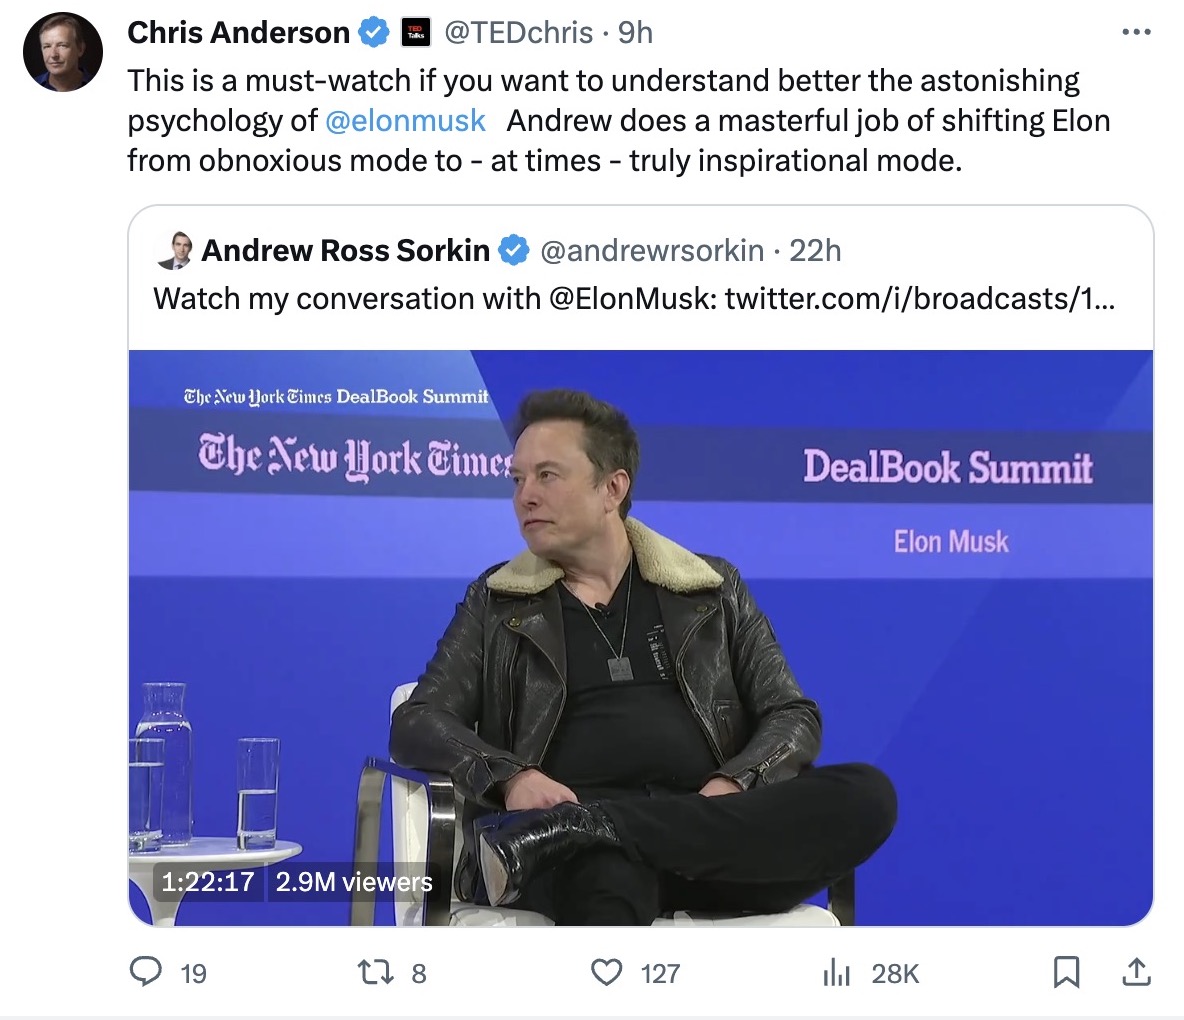 wild to see Chris Anderson, the head of TED Talks, still unabashedly defending Musk's worst behavior